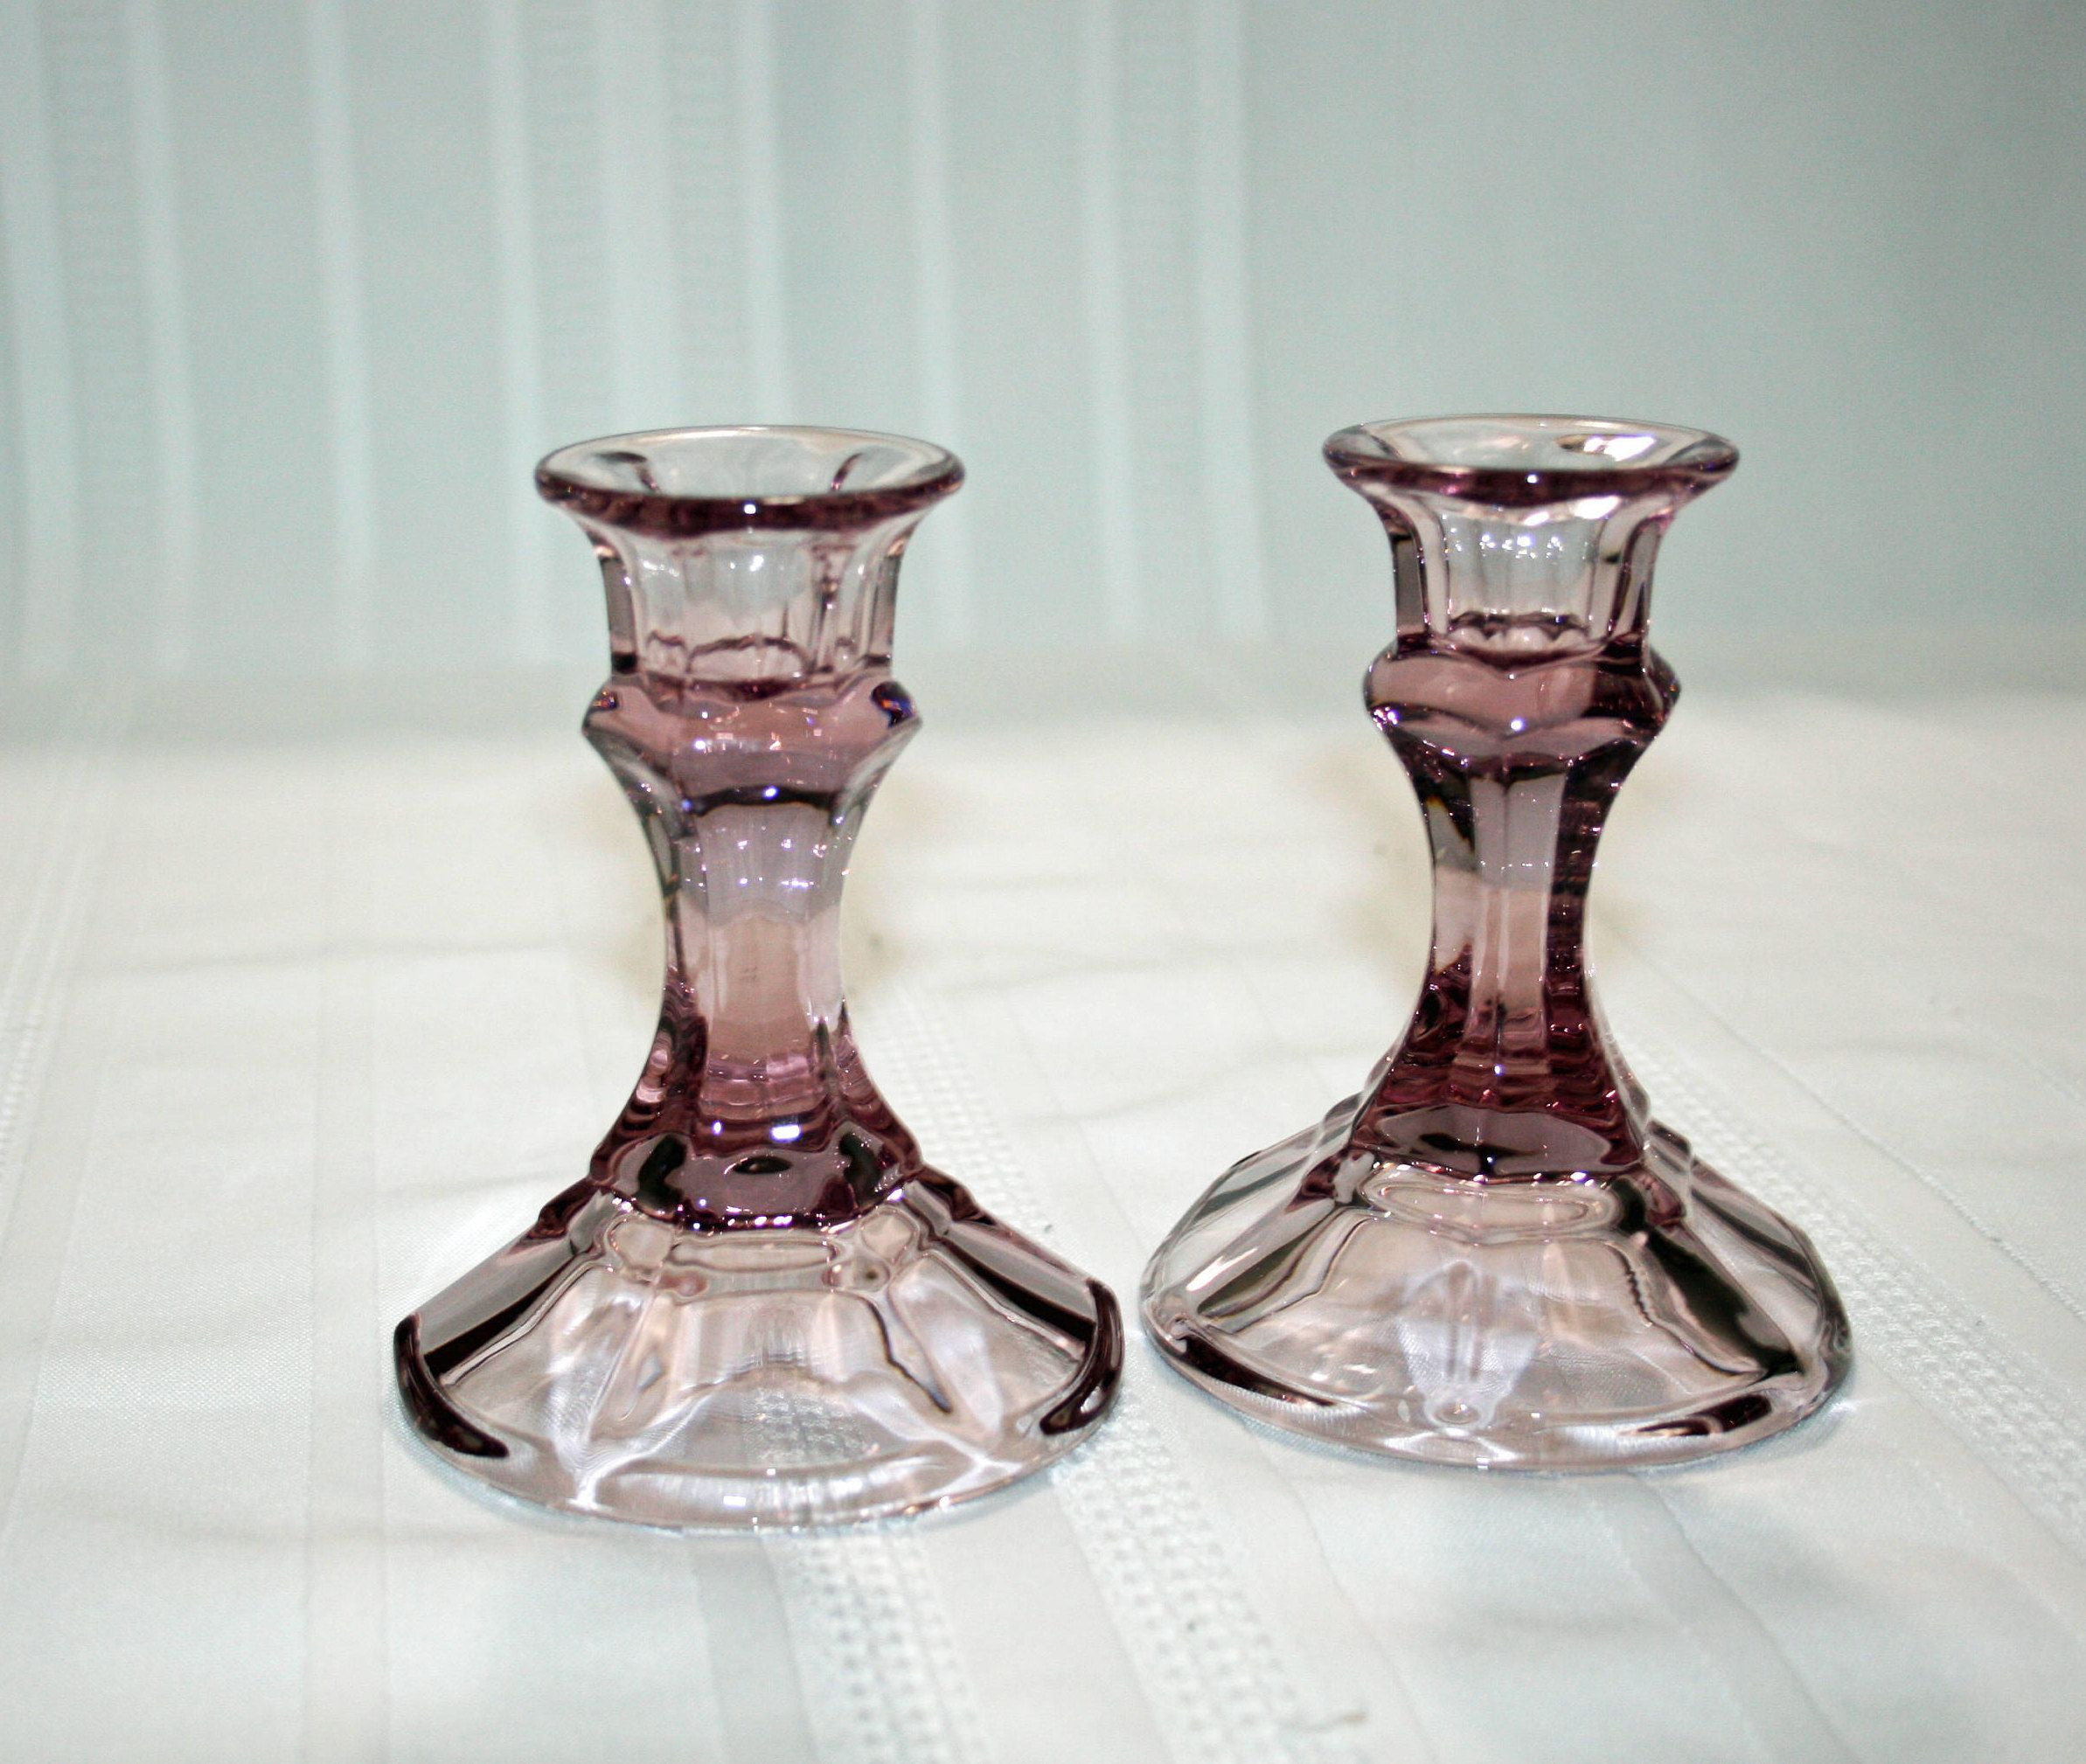 15 Lovable Vintage Lenox Vases 2023 free download vintage lenox vases of vintage pair 6 inch pressed glass candlesticks with hand c within vintage amethyst candlesticks pressed glass purple candle holders february wedding depression glass t